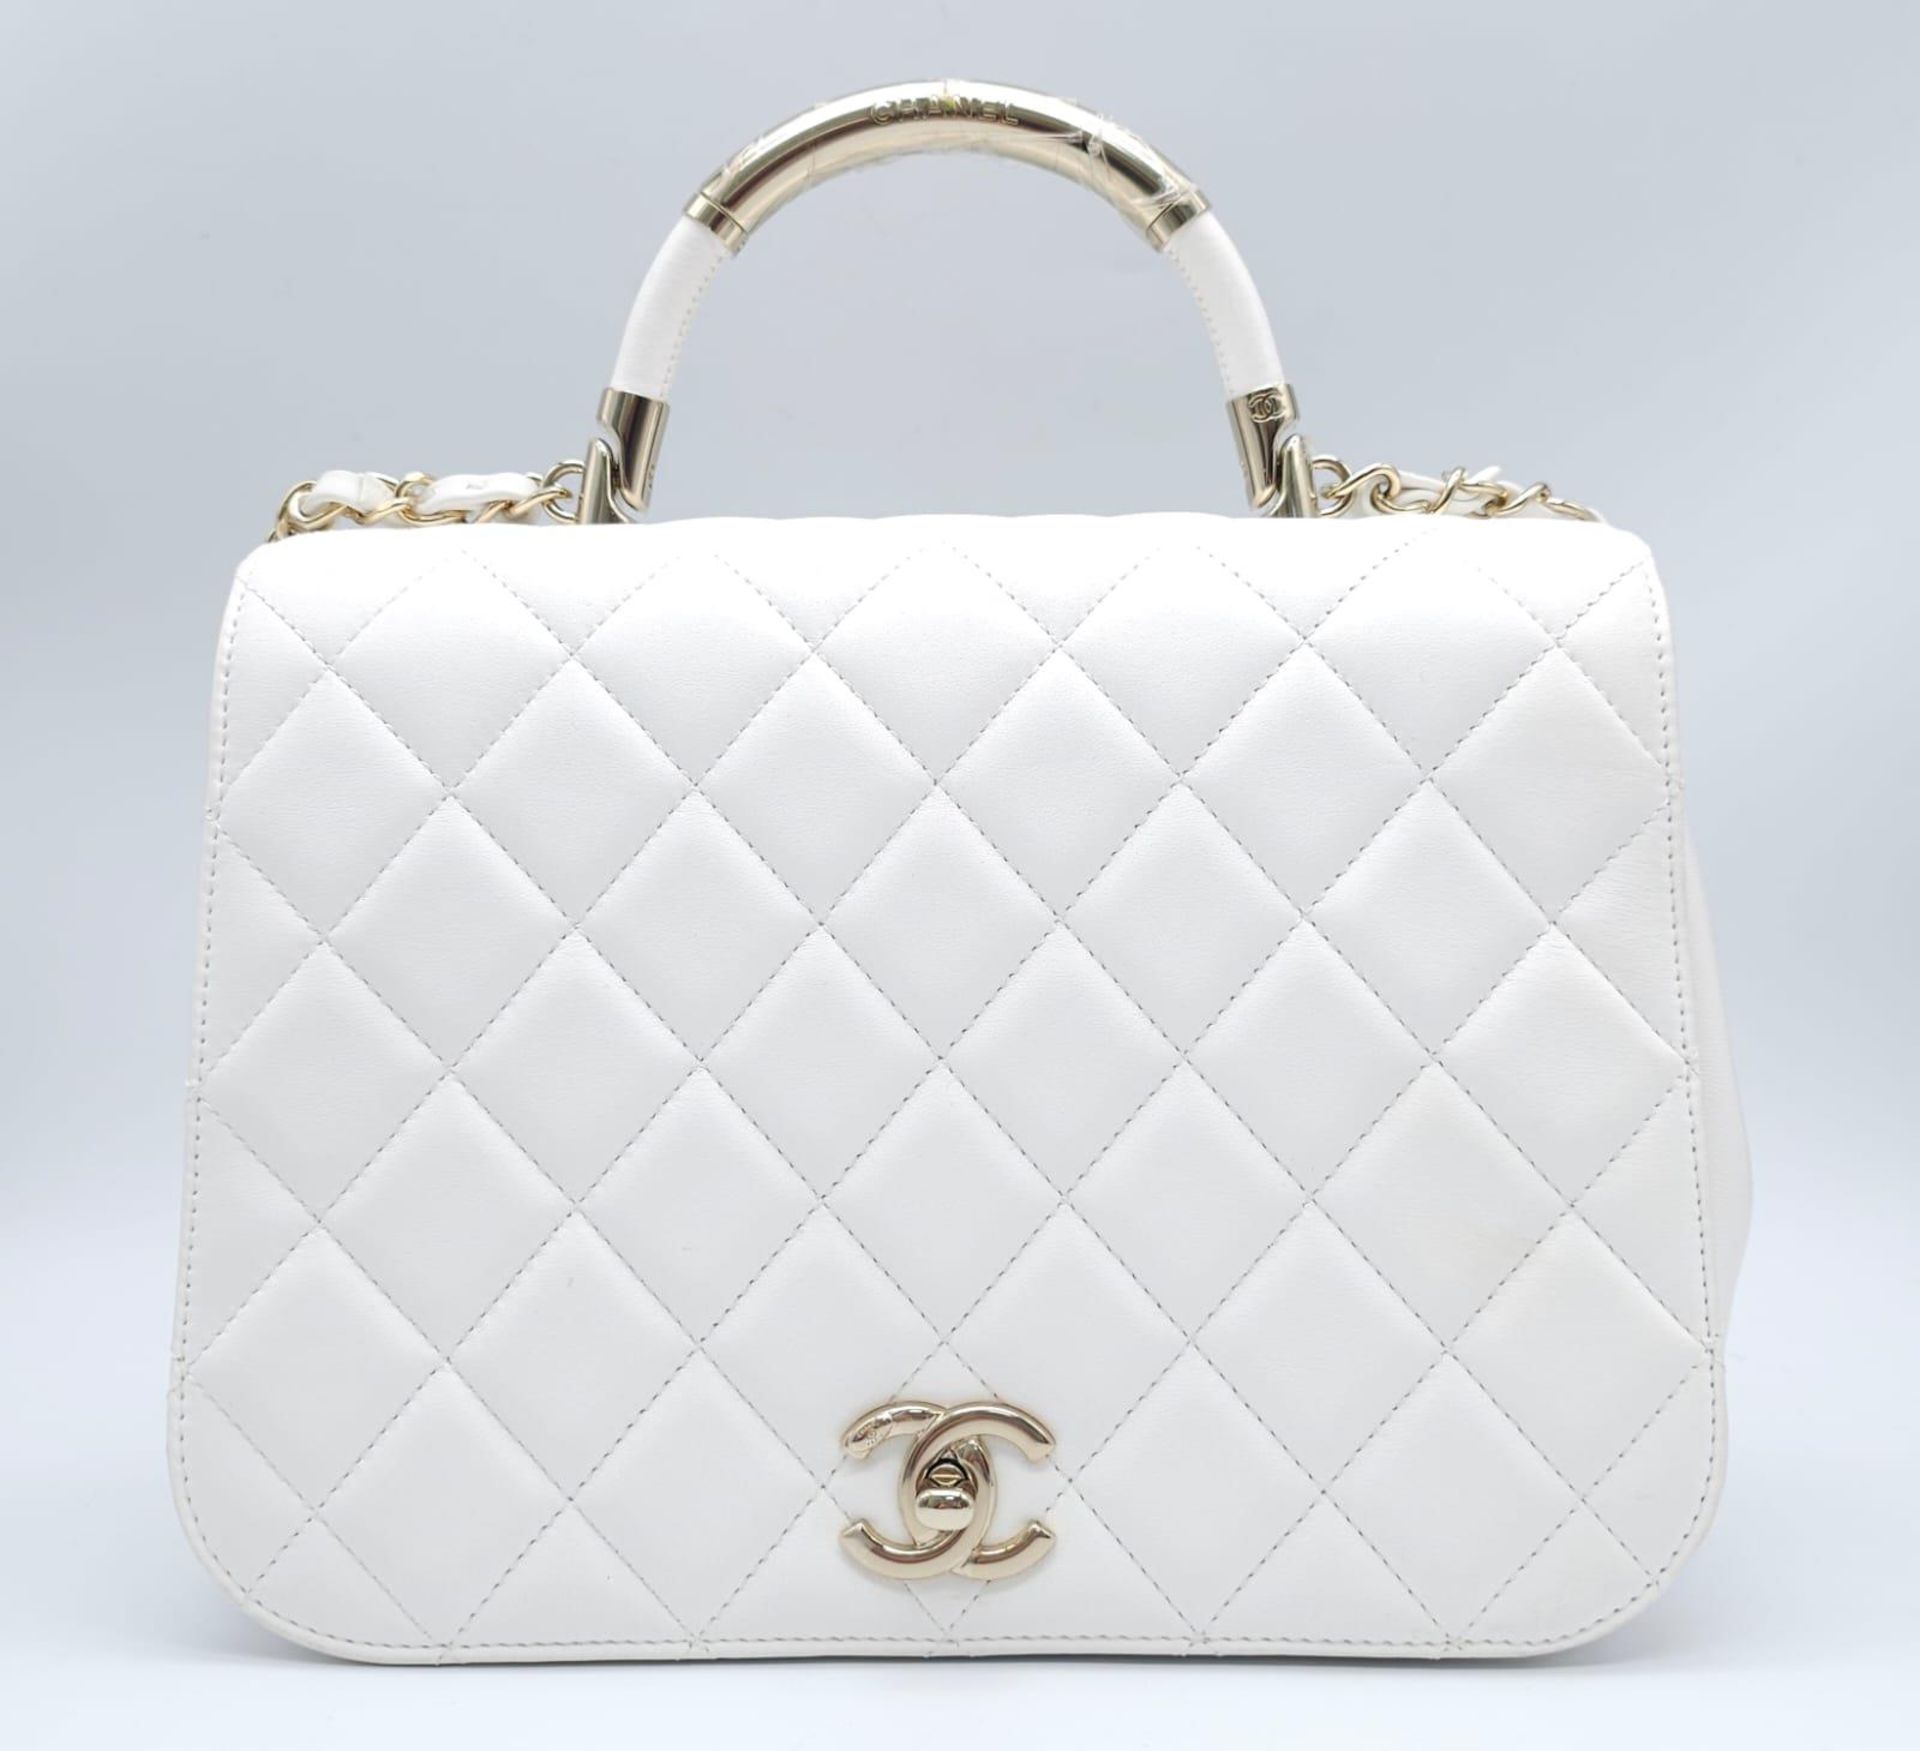 Chanel Carry Chic Bag. Lamskin throughout, front single flap is quilted with diamond stitching.